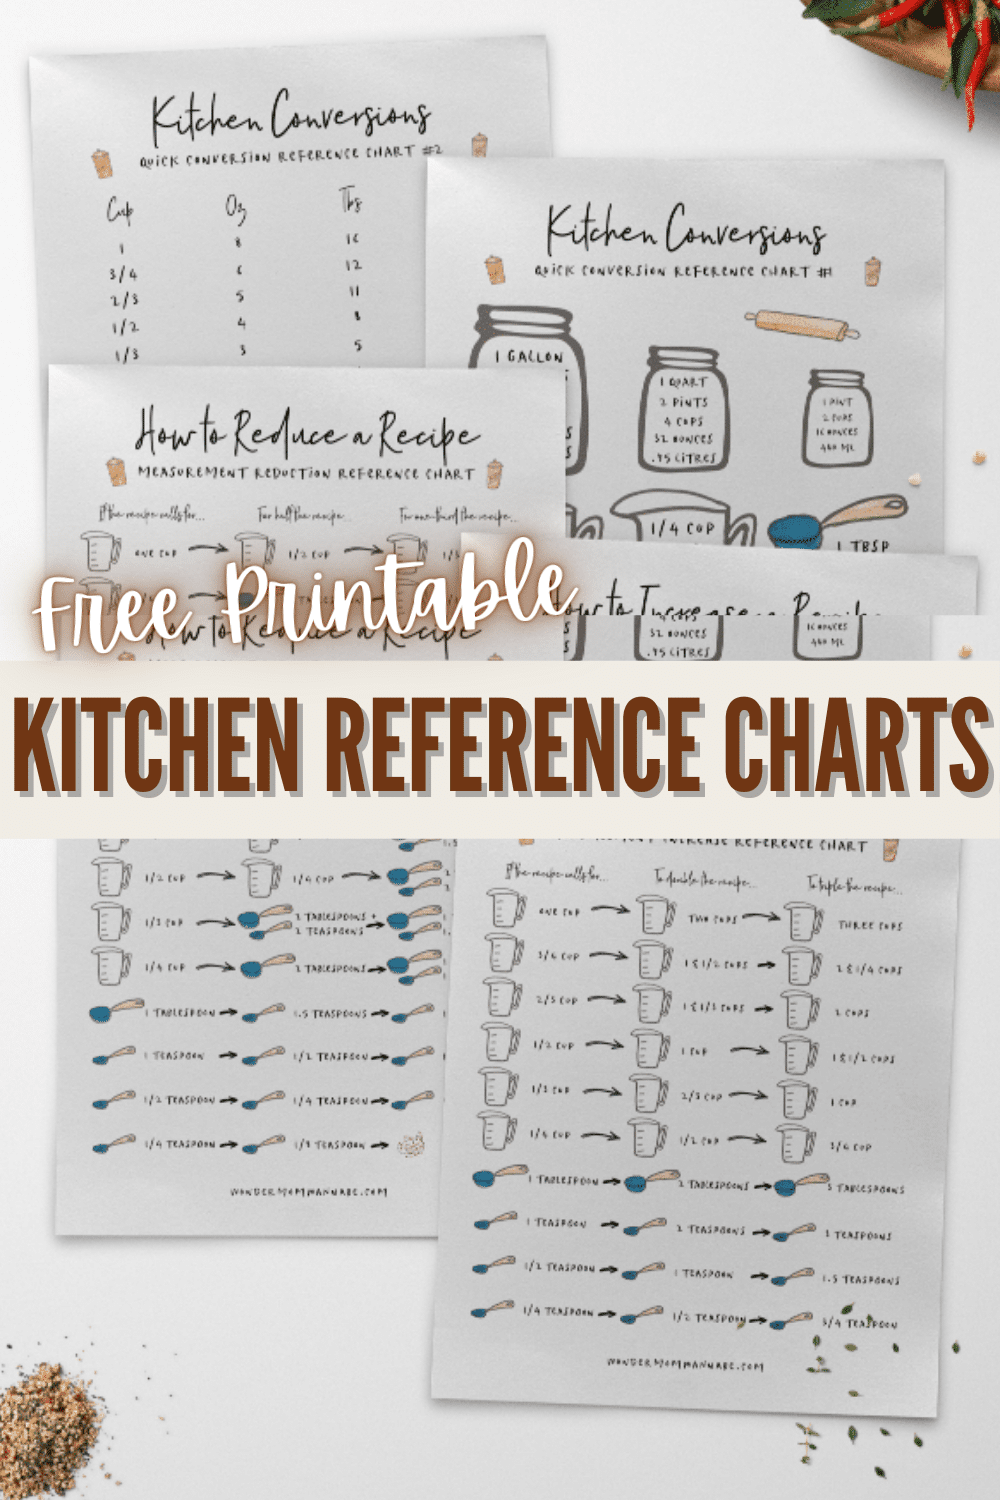 These free printable kitchen reference charts will simplify your cooking and save you so much time. Hang these on the refrigerator for quick answers. #printables #kitchenconversions #freeprintables via @wondermomwannab